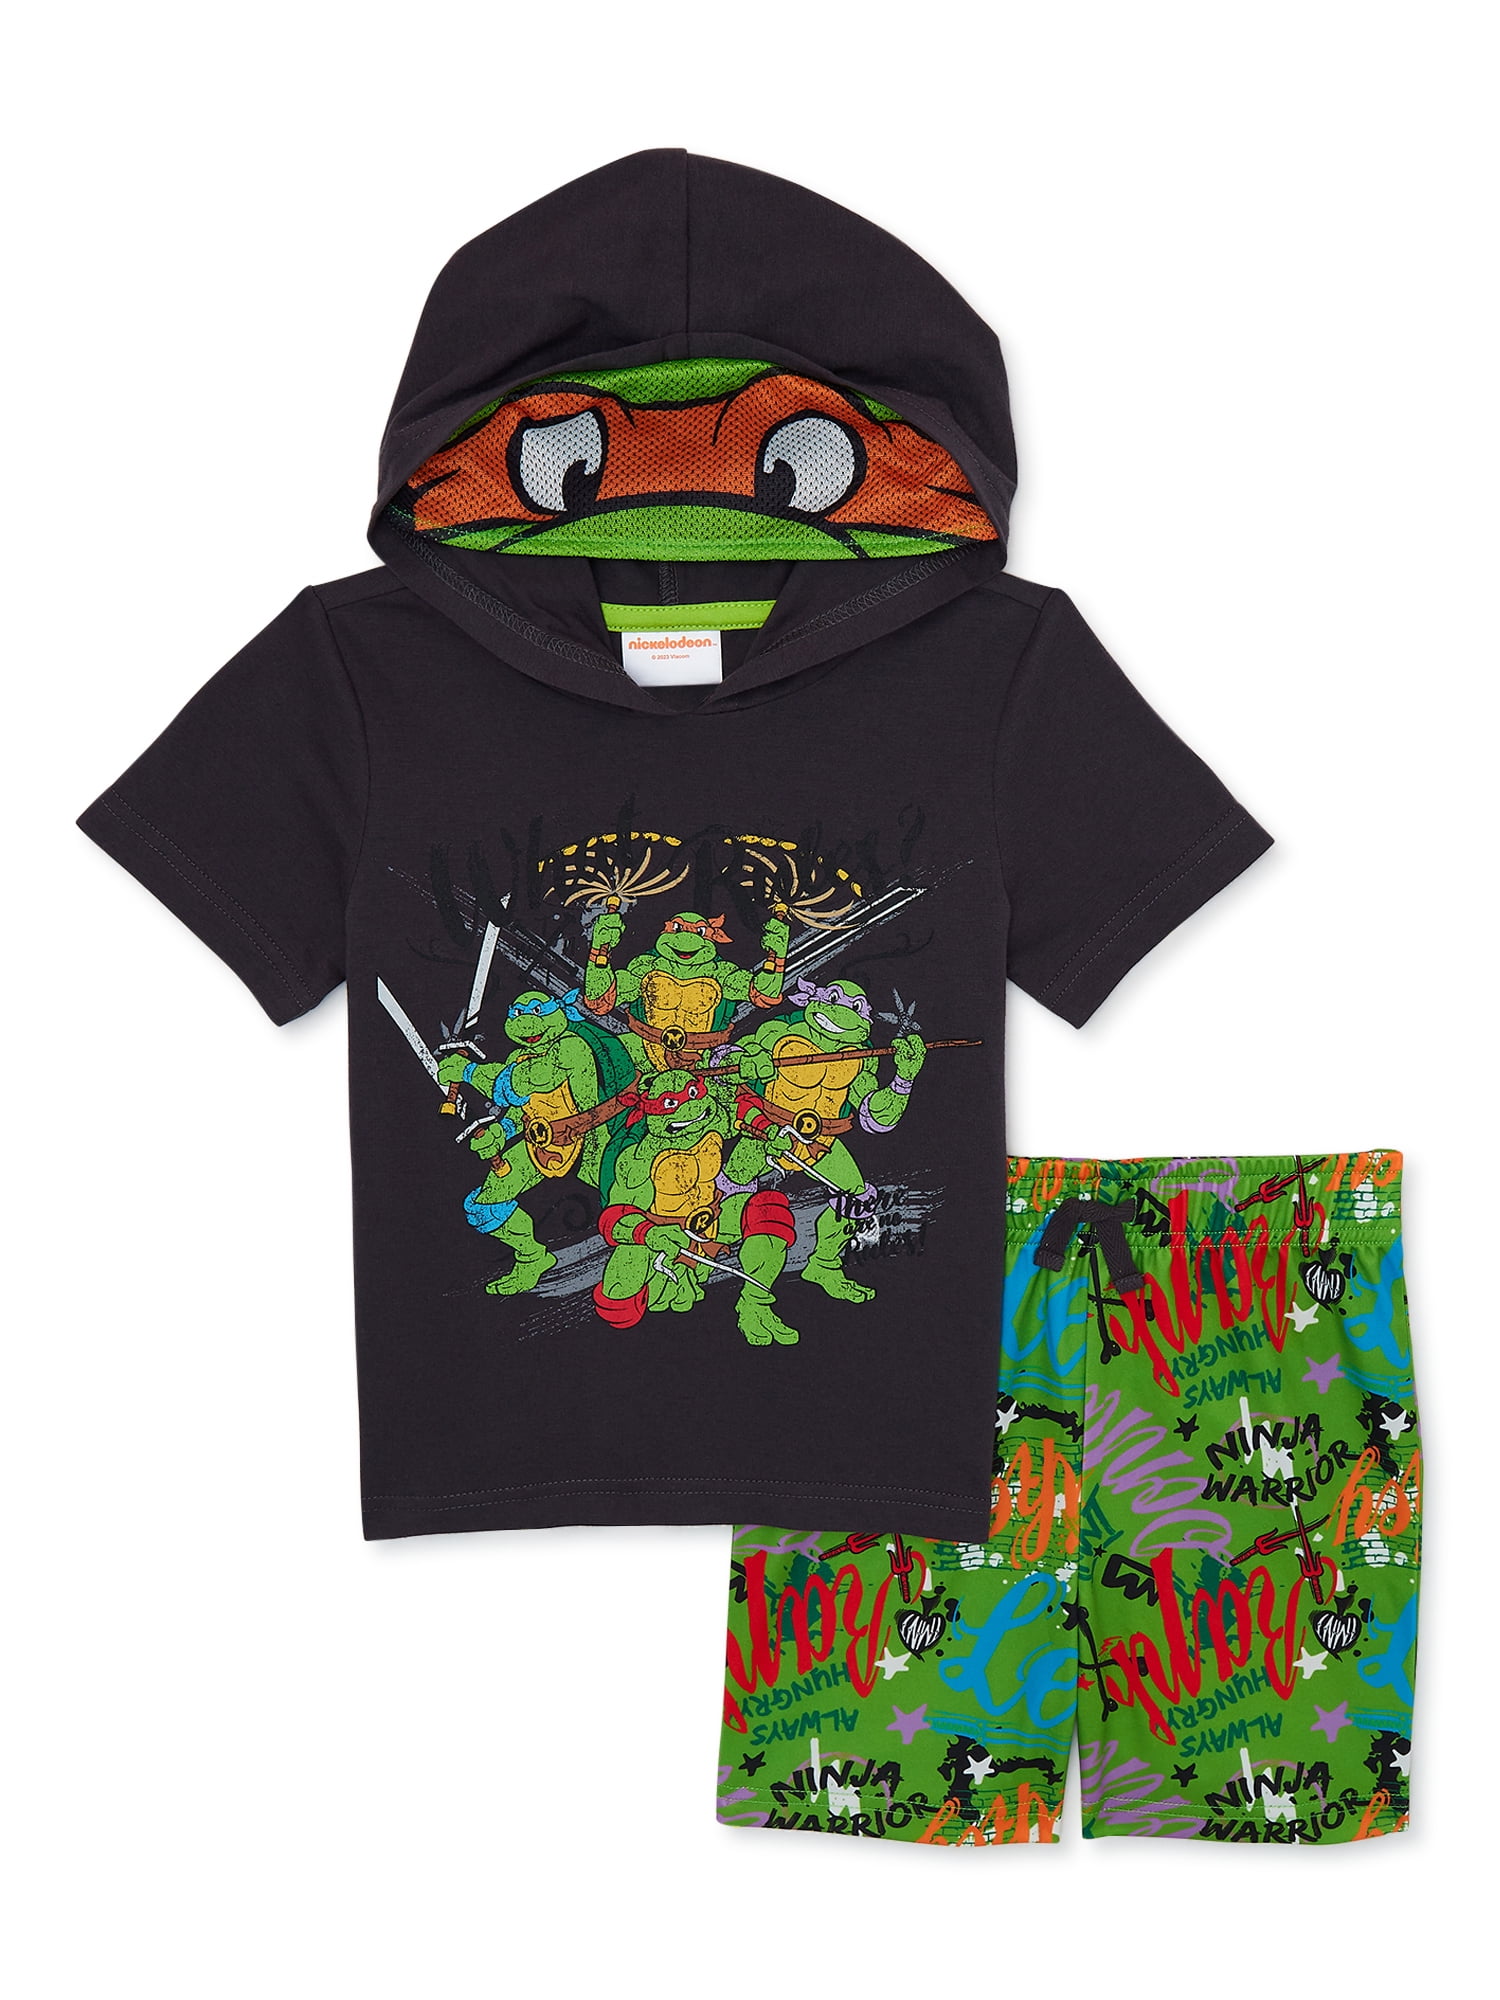 Teenage Mutant Ninja Turtles Toddler Boy French Terry Graphic Top and  Shorts Set, 2-Piece, Sizes 18M-5T 